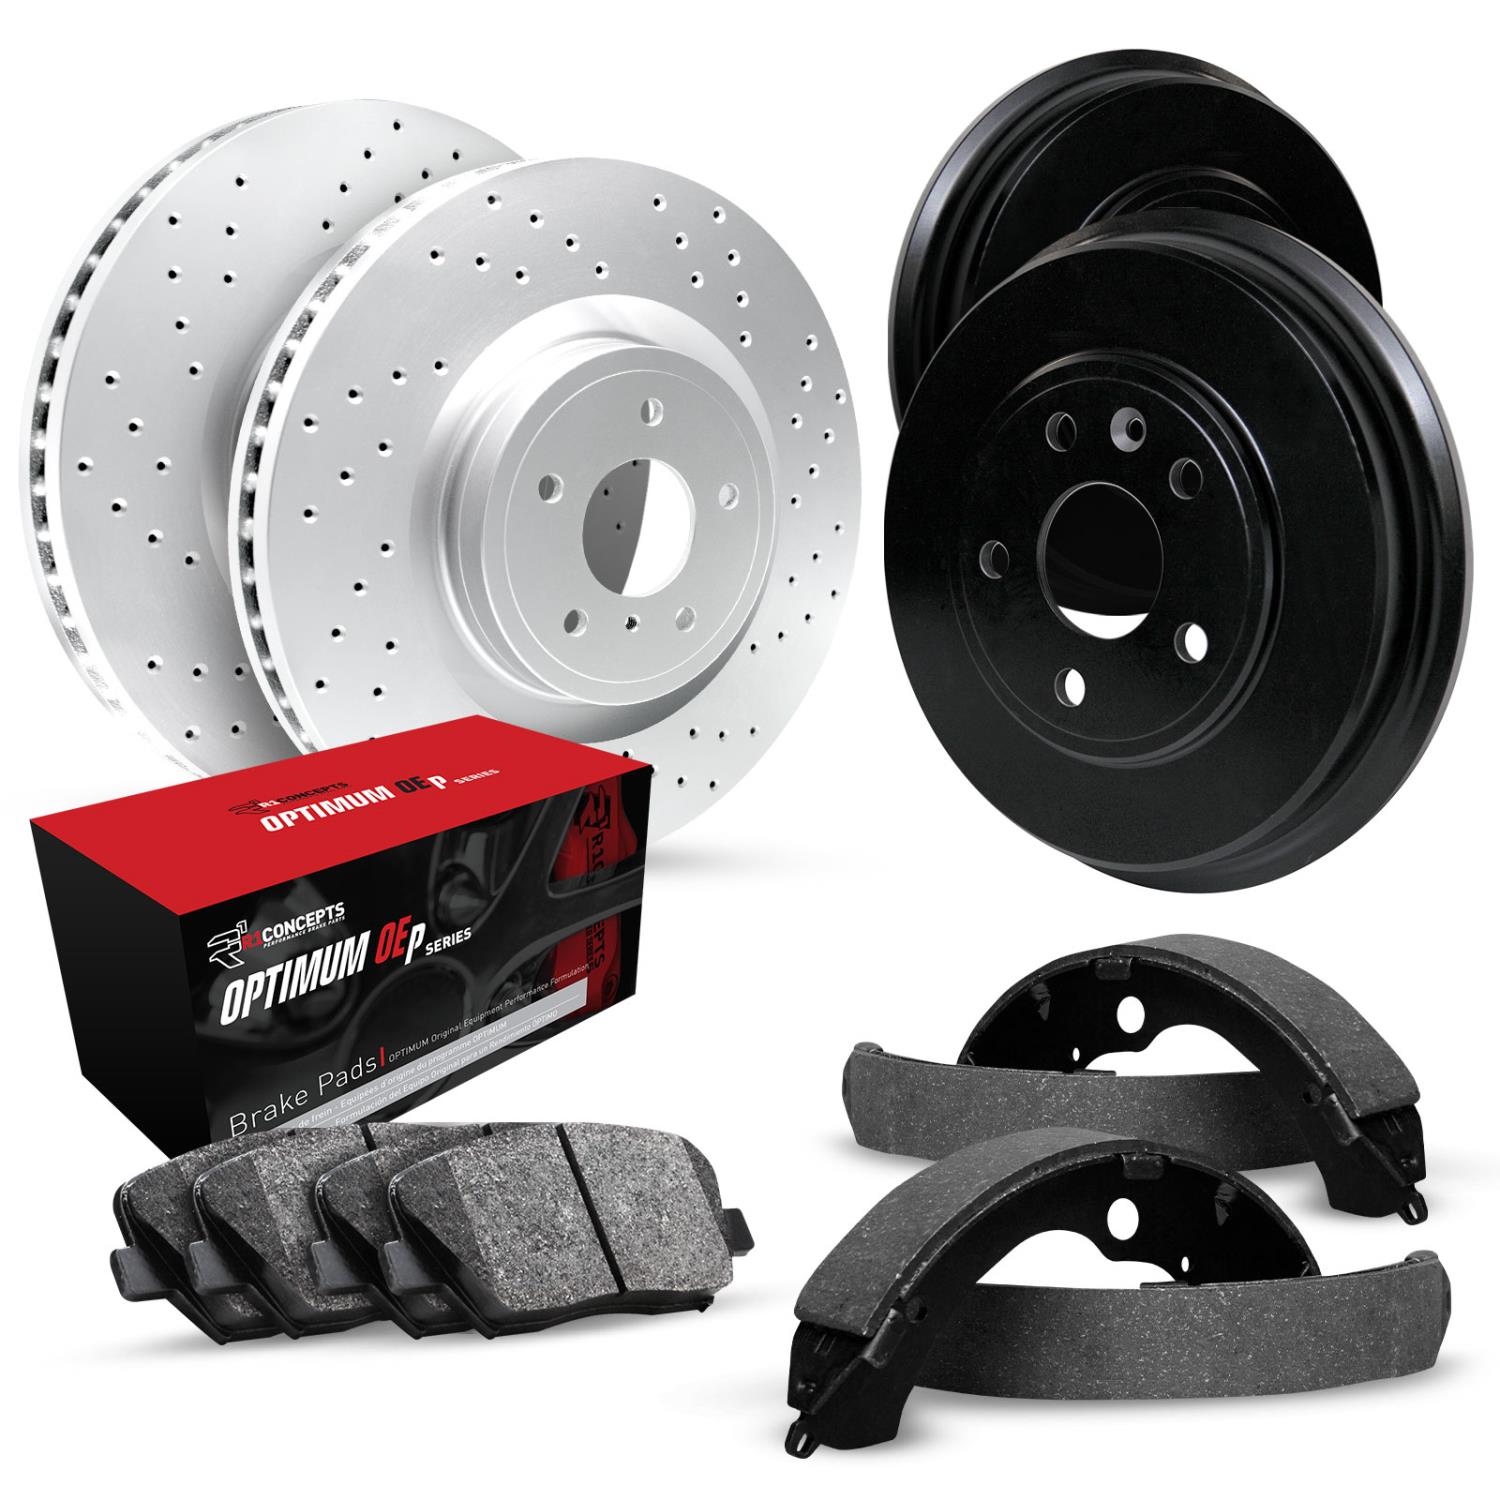 GEO-Carbon Drilled Brake Rotor & Drum Set w/Optimum OE Pads & Shoes, 2001-2006 Infiniti/Nissan, Position: Front & Rear